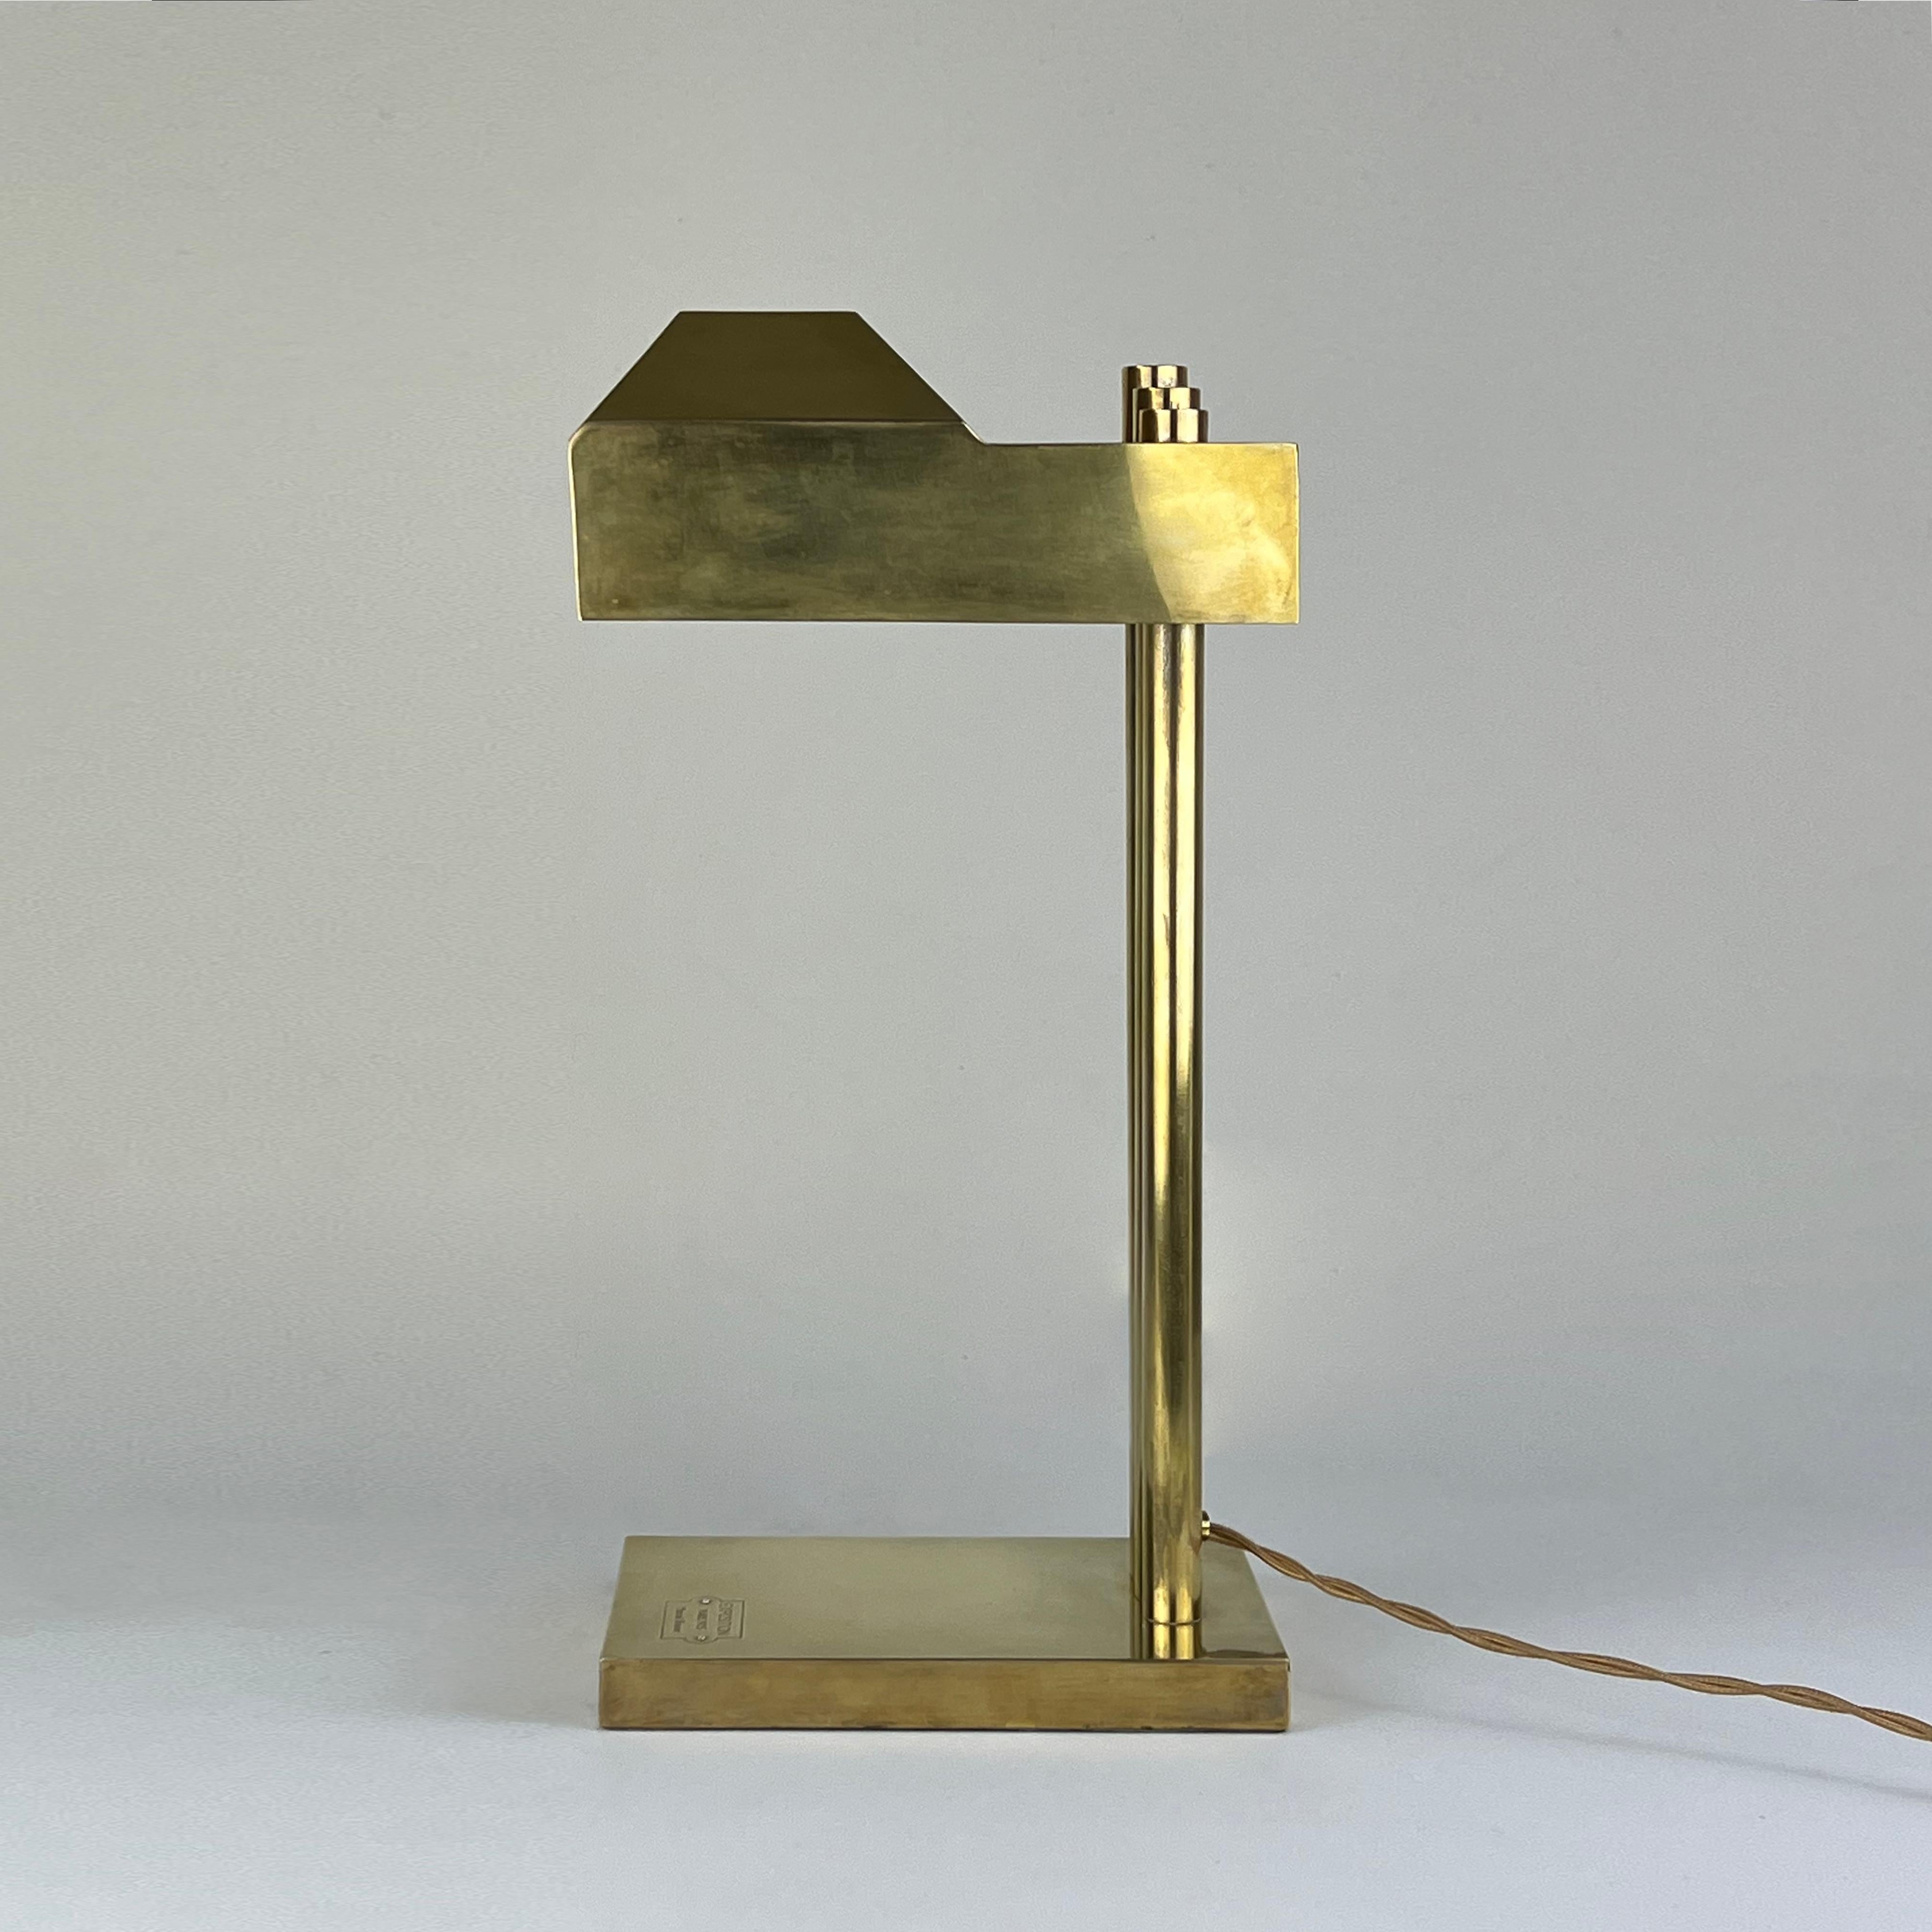 20th Century Brass Table Lamp by Marcel Breuer, 1925, Marked